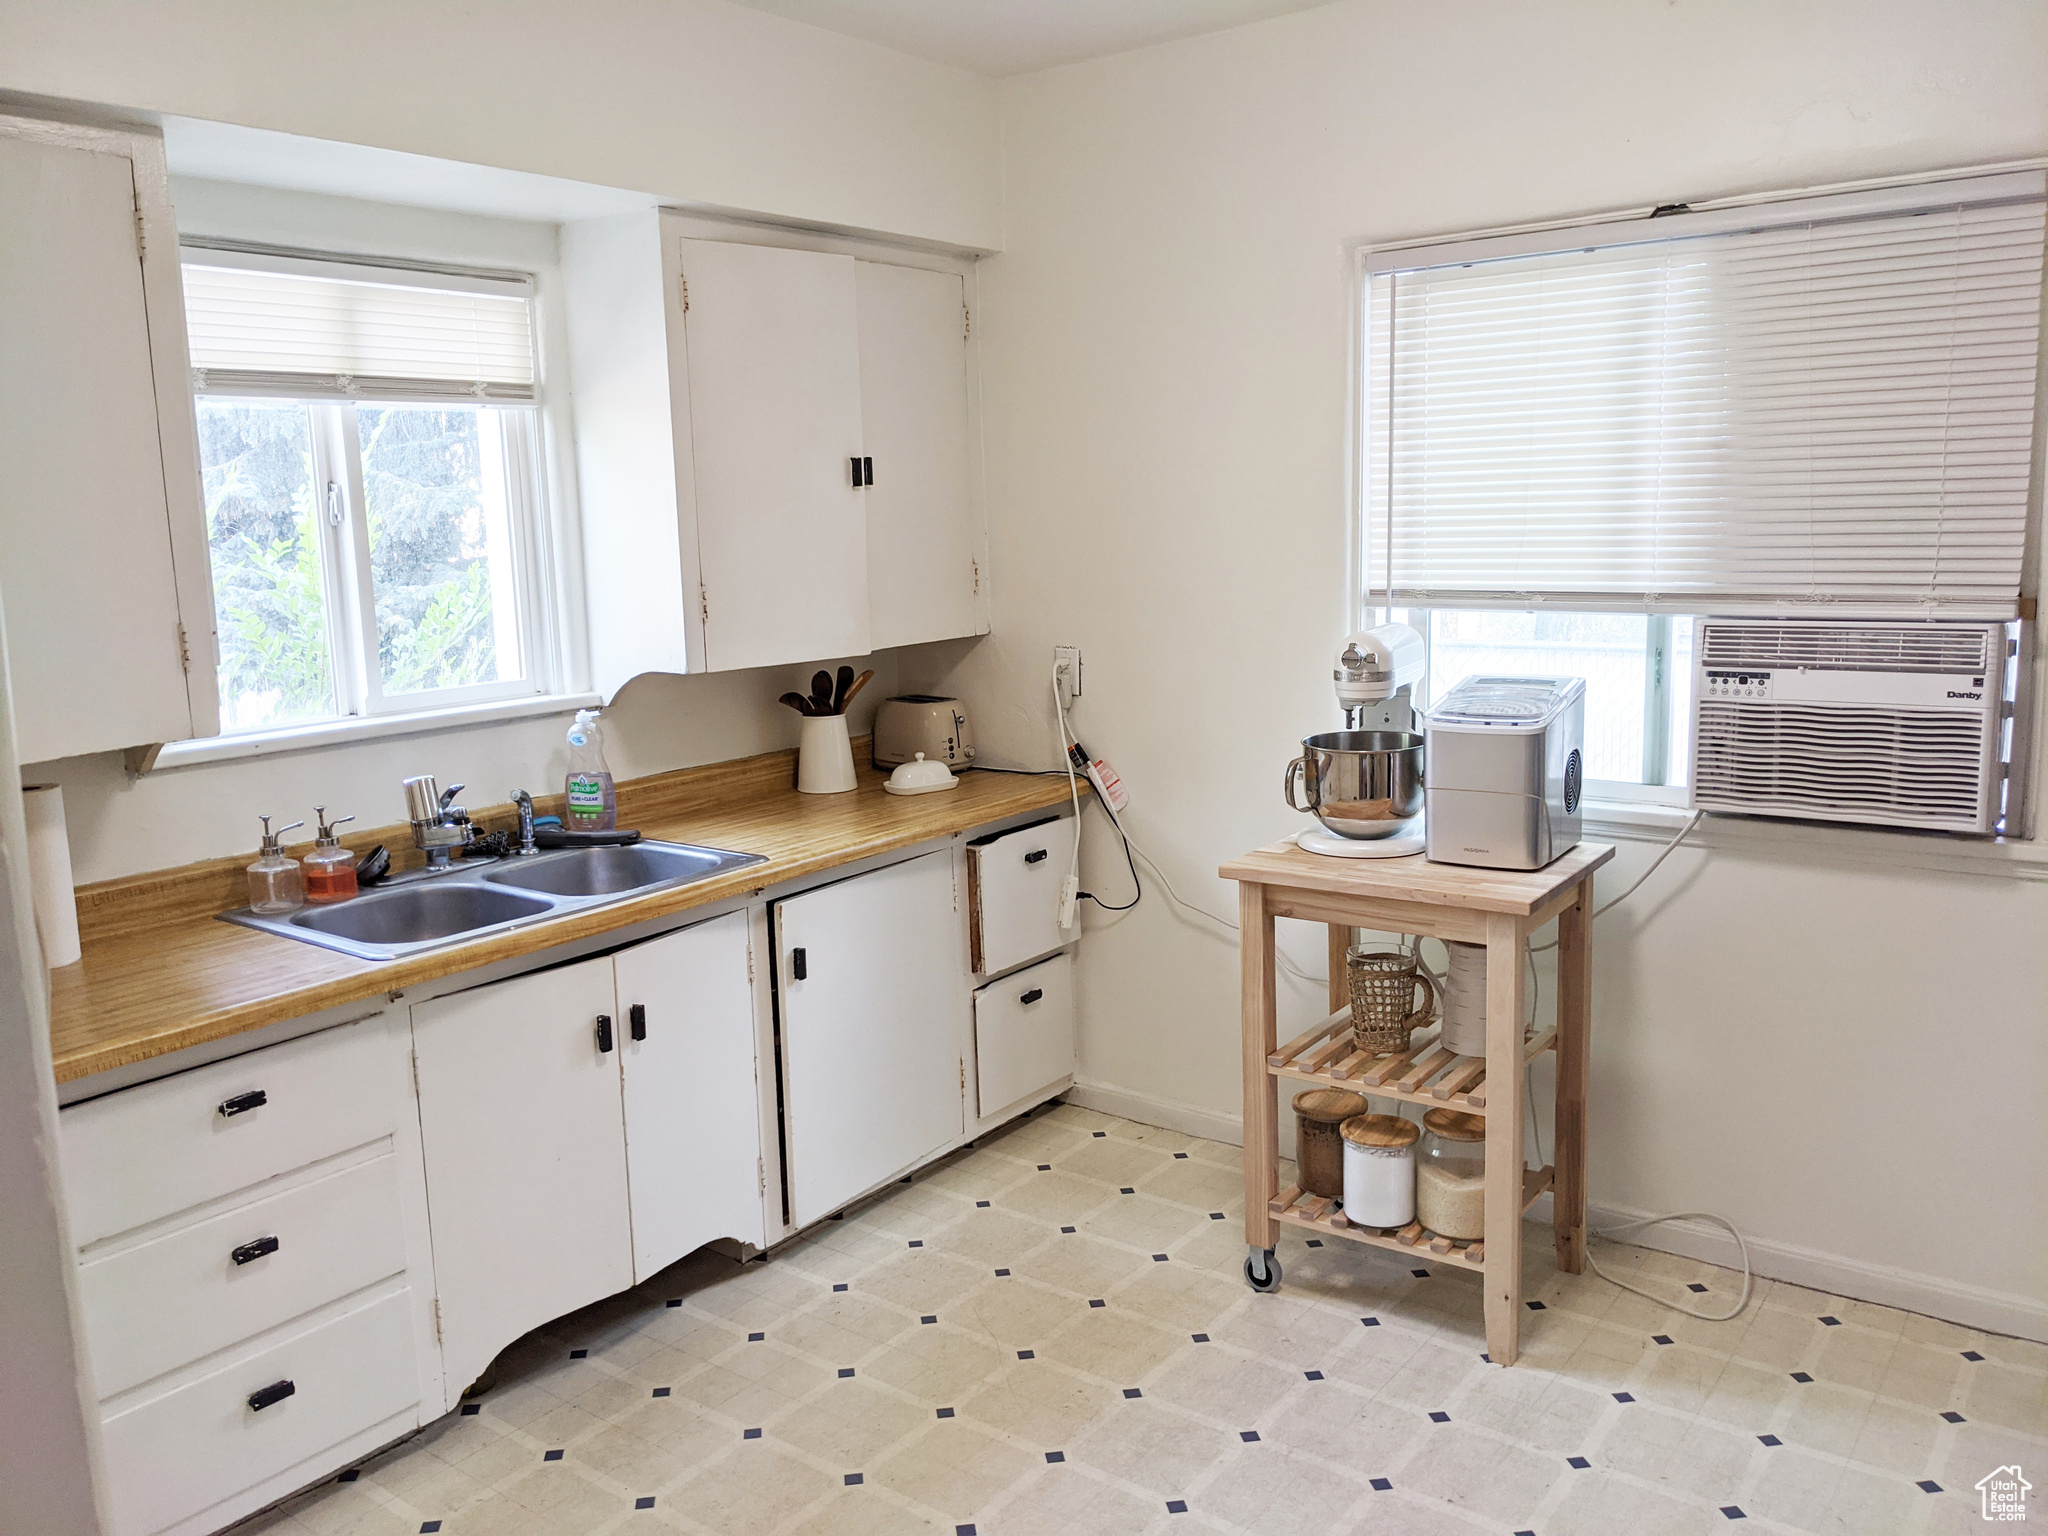 Kitchen featuring sink, white cabinetry, and light tile floors